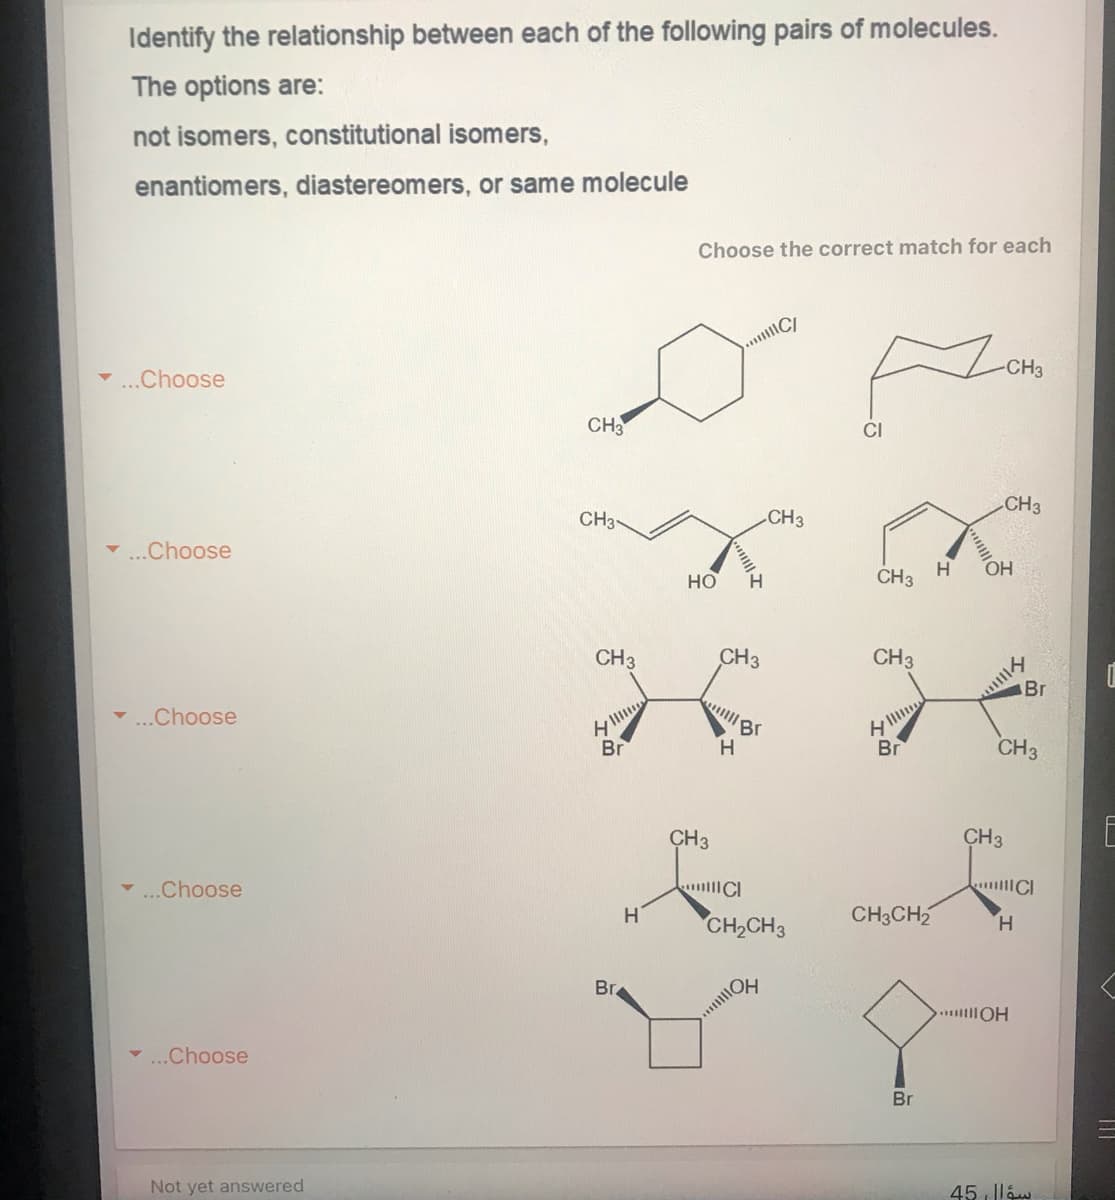 Identify the relationship between each of the following pairs of molecules.
The options are:
not isomers, constitutional isomers,
enantiomers, diastereomers, or same molecule
Choose the correct match for each
-CH3
-...Choose
CH3
CI
CH3
CH3-
CH3
..Choose
HO
H.
CH3
CH3
CH3
CH3
Br
..Choose
H.
Br
CH3
CH3
CH3
E
..Choose
CH3CH2
CH2CH3
H.
Br.
.. OH
-..Choose
Br
Not yet answered
45 lláw
